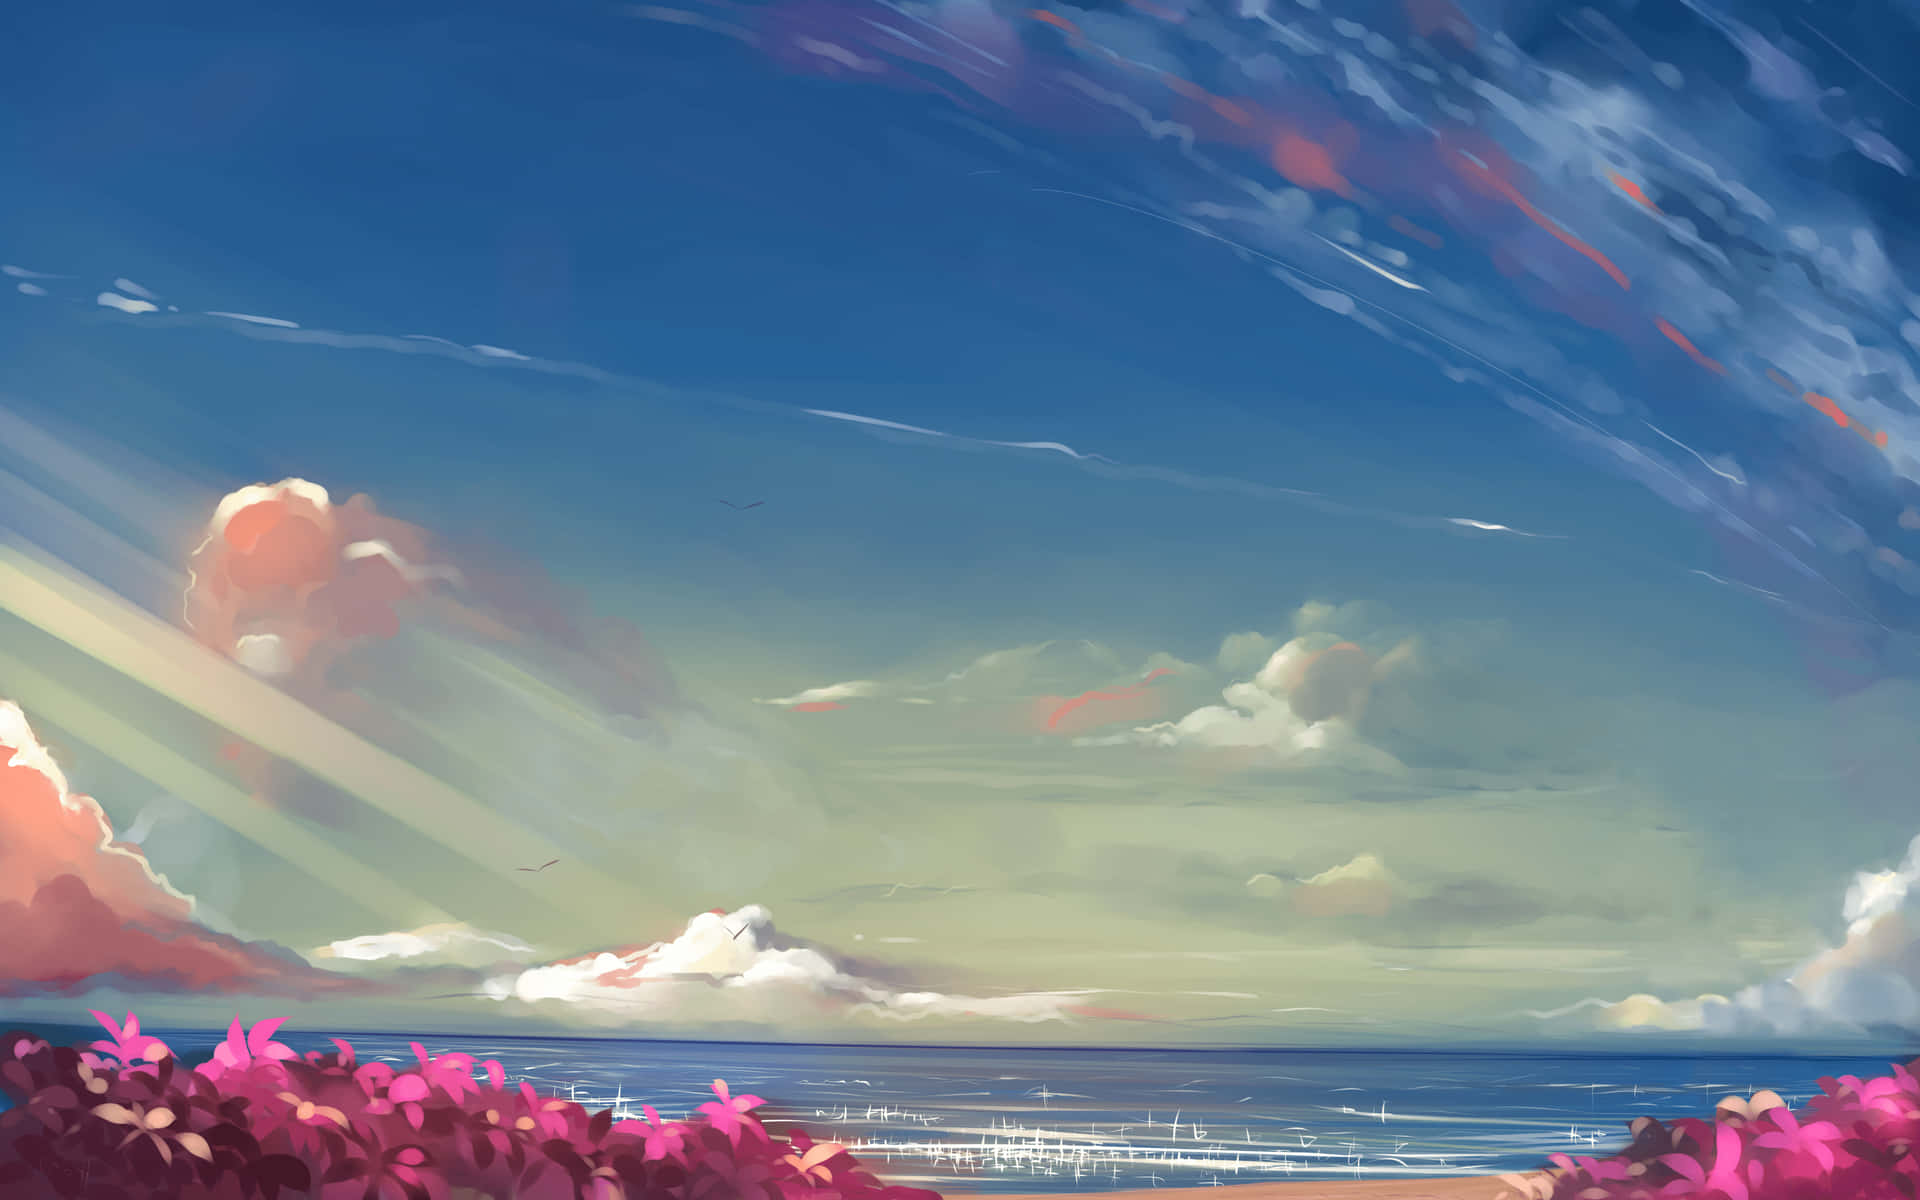 Feel the freedom of endless possibilities in Anime Sky Wallpaper